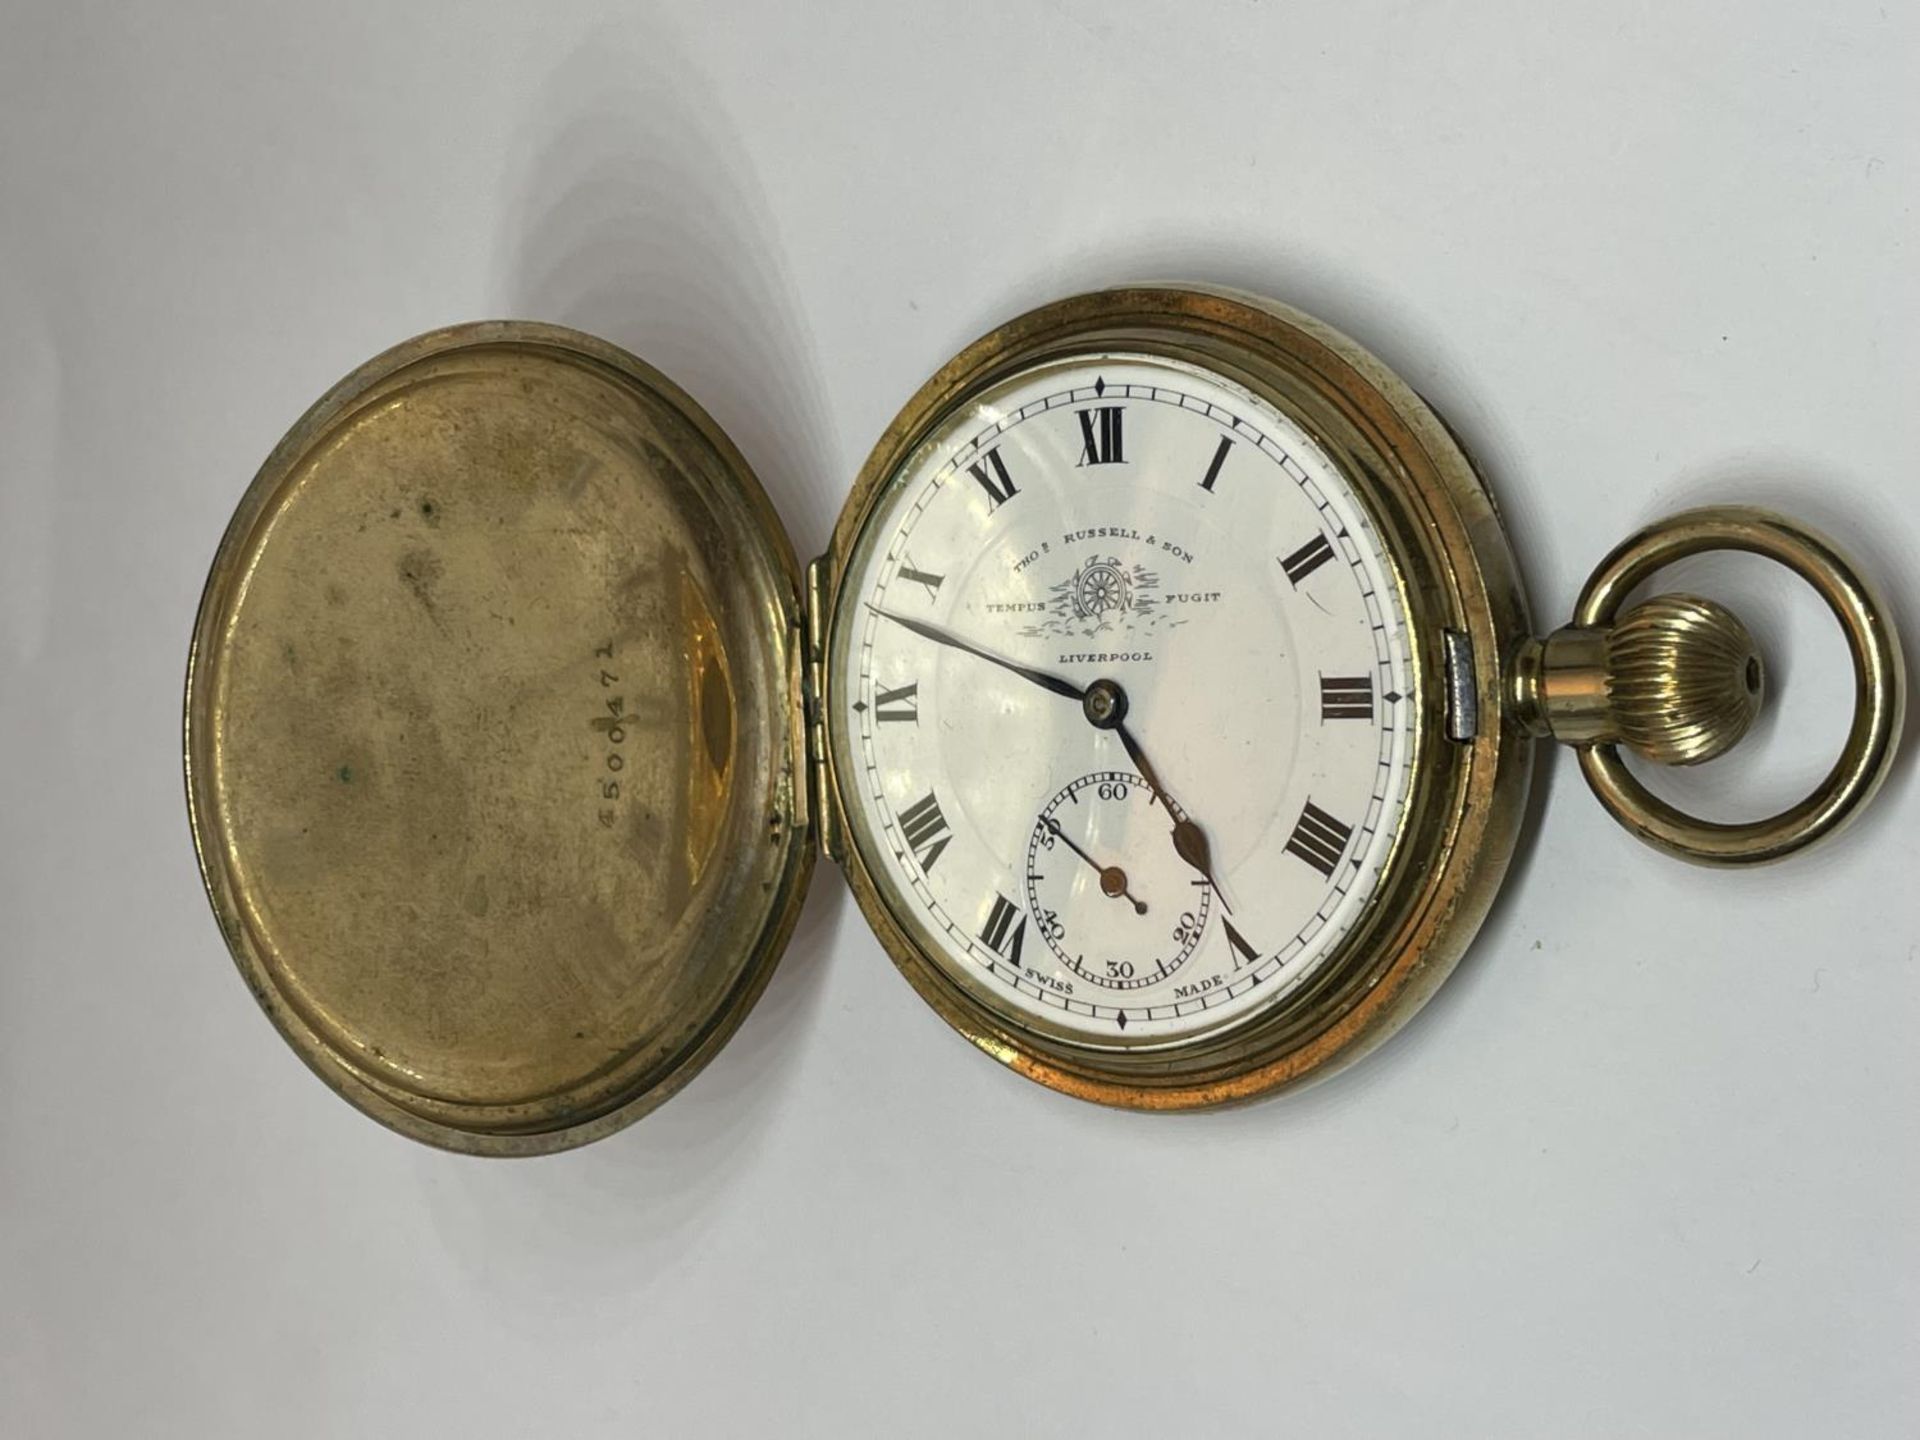 A GOLD PLATED THOS RUSSELL AND SON LIVERPOOL POCKET WATCH SEEN WORKING BUT NO WARRANTY IN A - Image 3 of 3